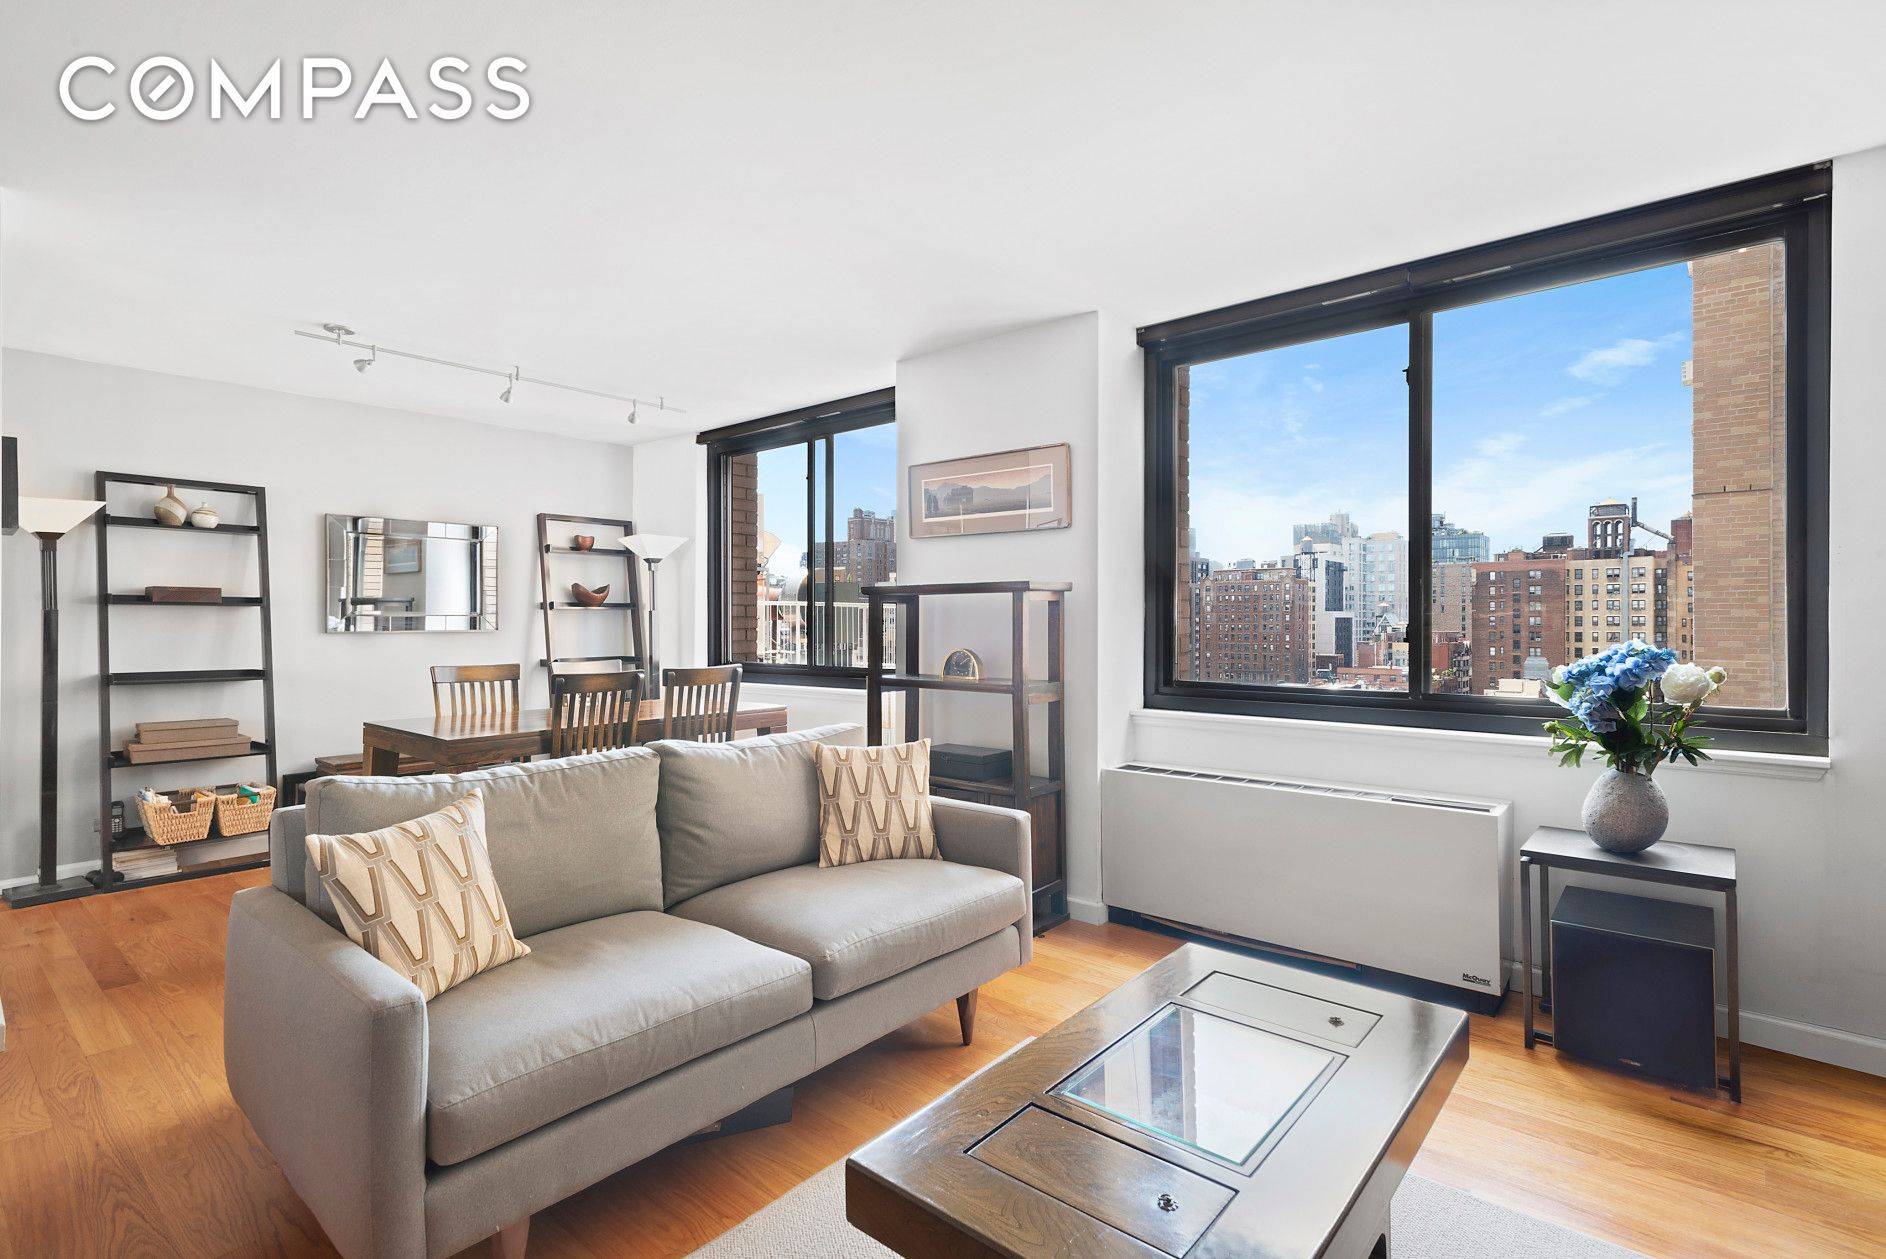 Just Listed NO FEE A beautiful 2 bed 2 bath duplex condominium with open western views in the best UWS local next to the Museum of Natural History and 1 ...